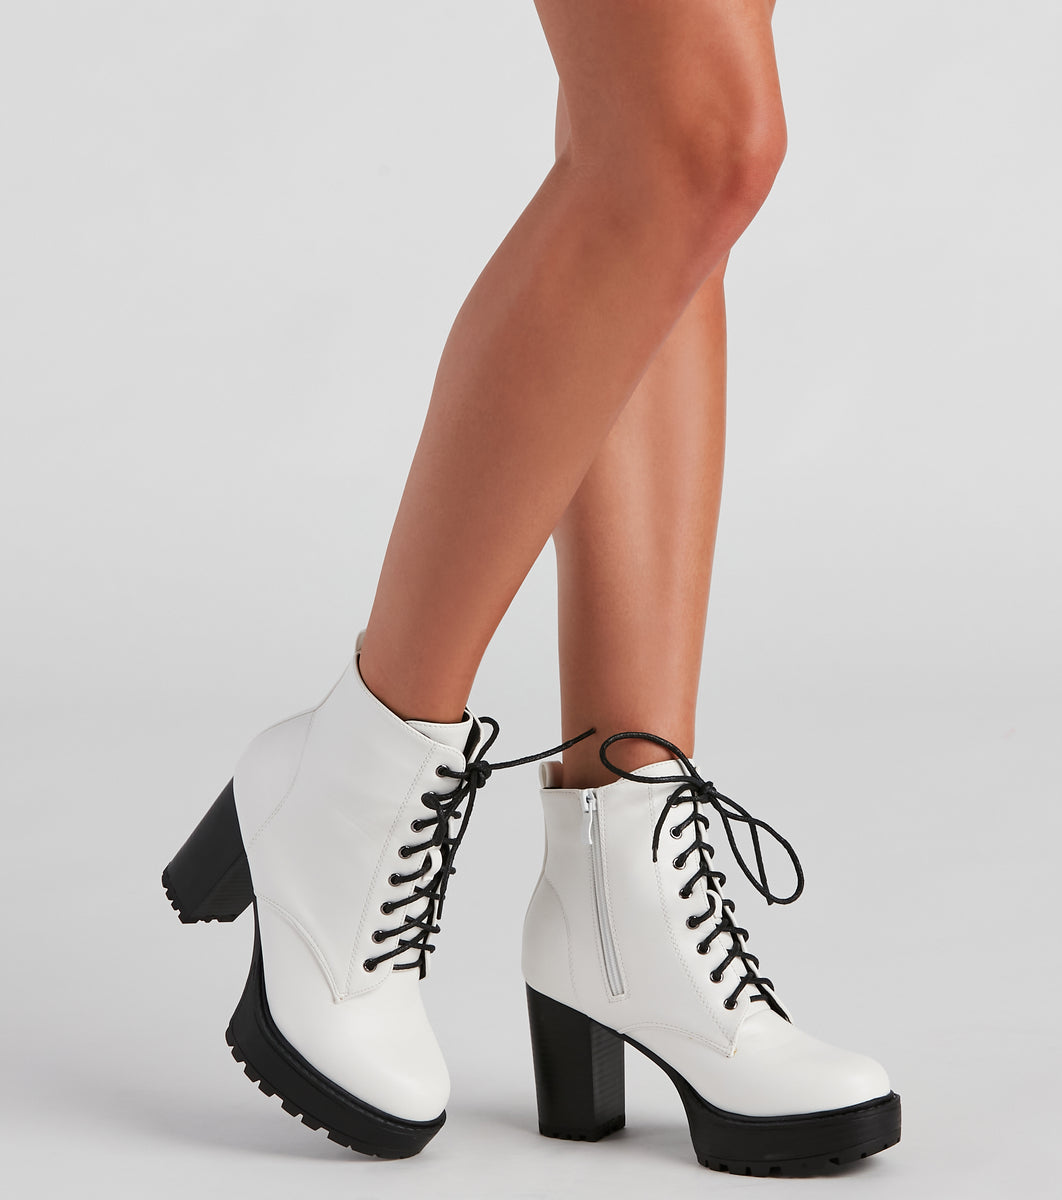 A.F. Vandevorst black thigh high boots spraypainted white with double  lacing (39) — fall 2015 performance - V A N II T A S